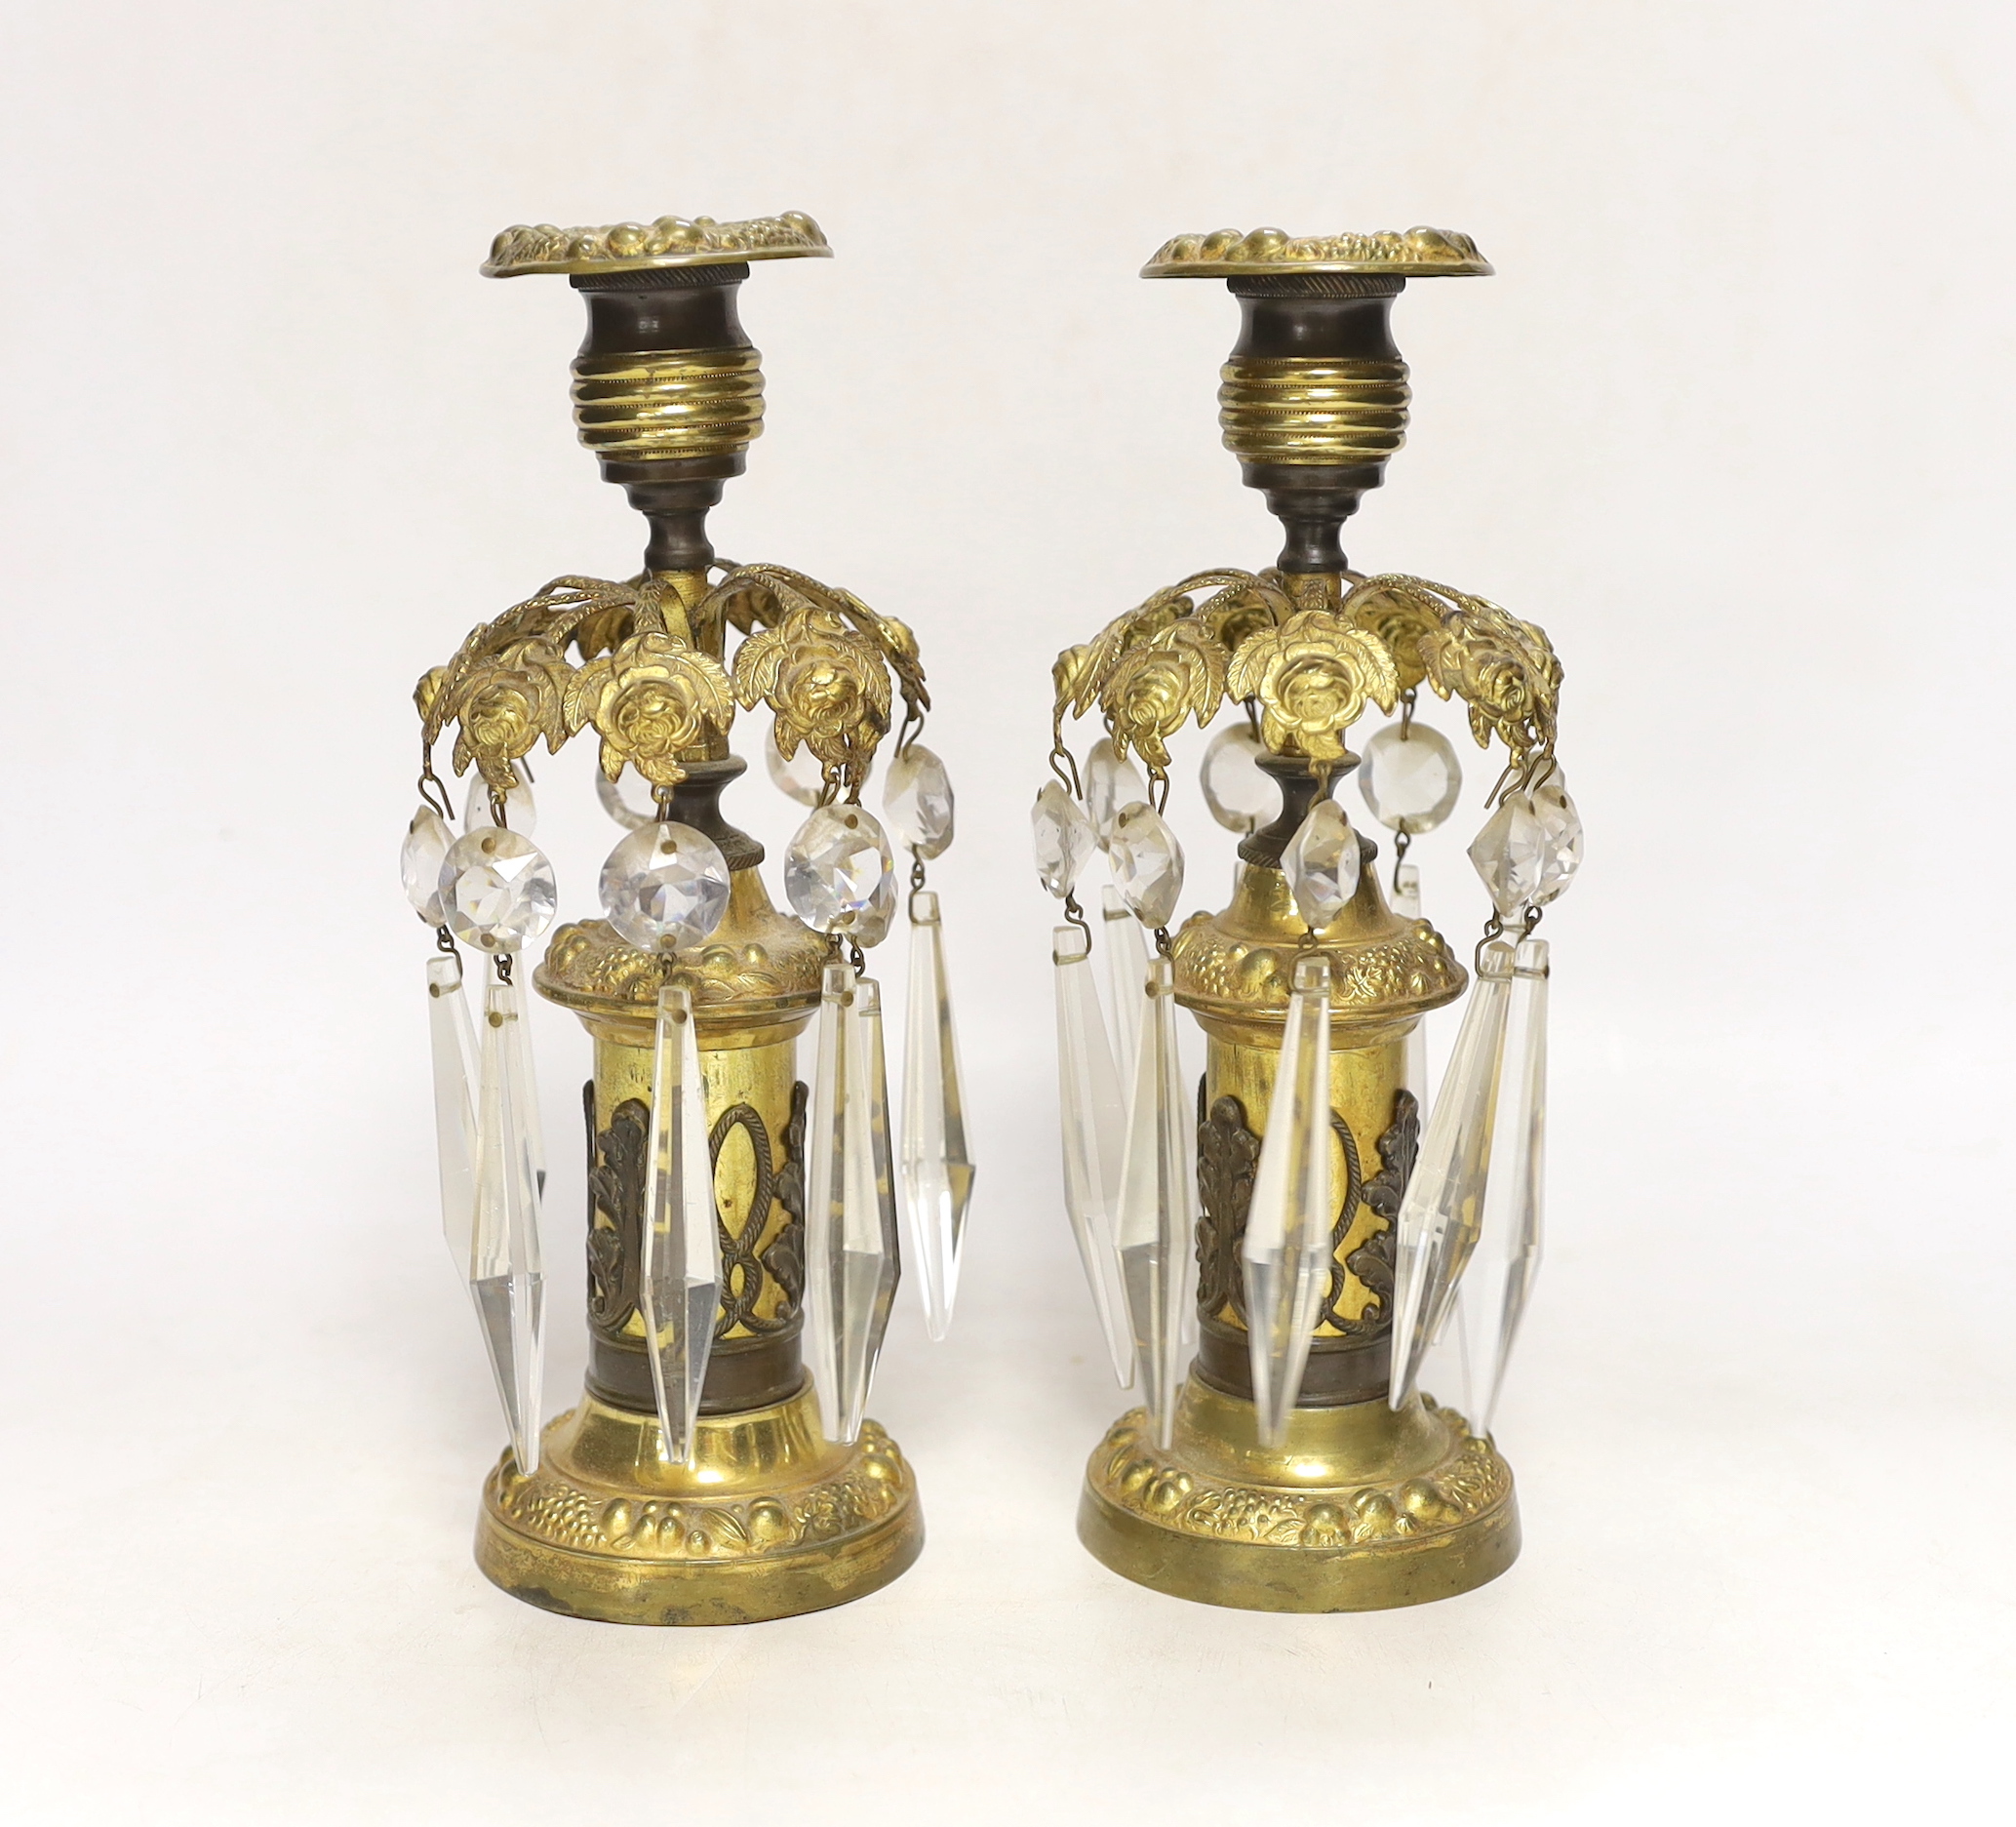 A pair of early 19th century ormolu table lustres, 23cm high - Image 2 of 4